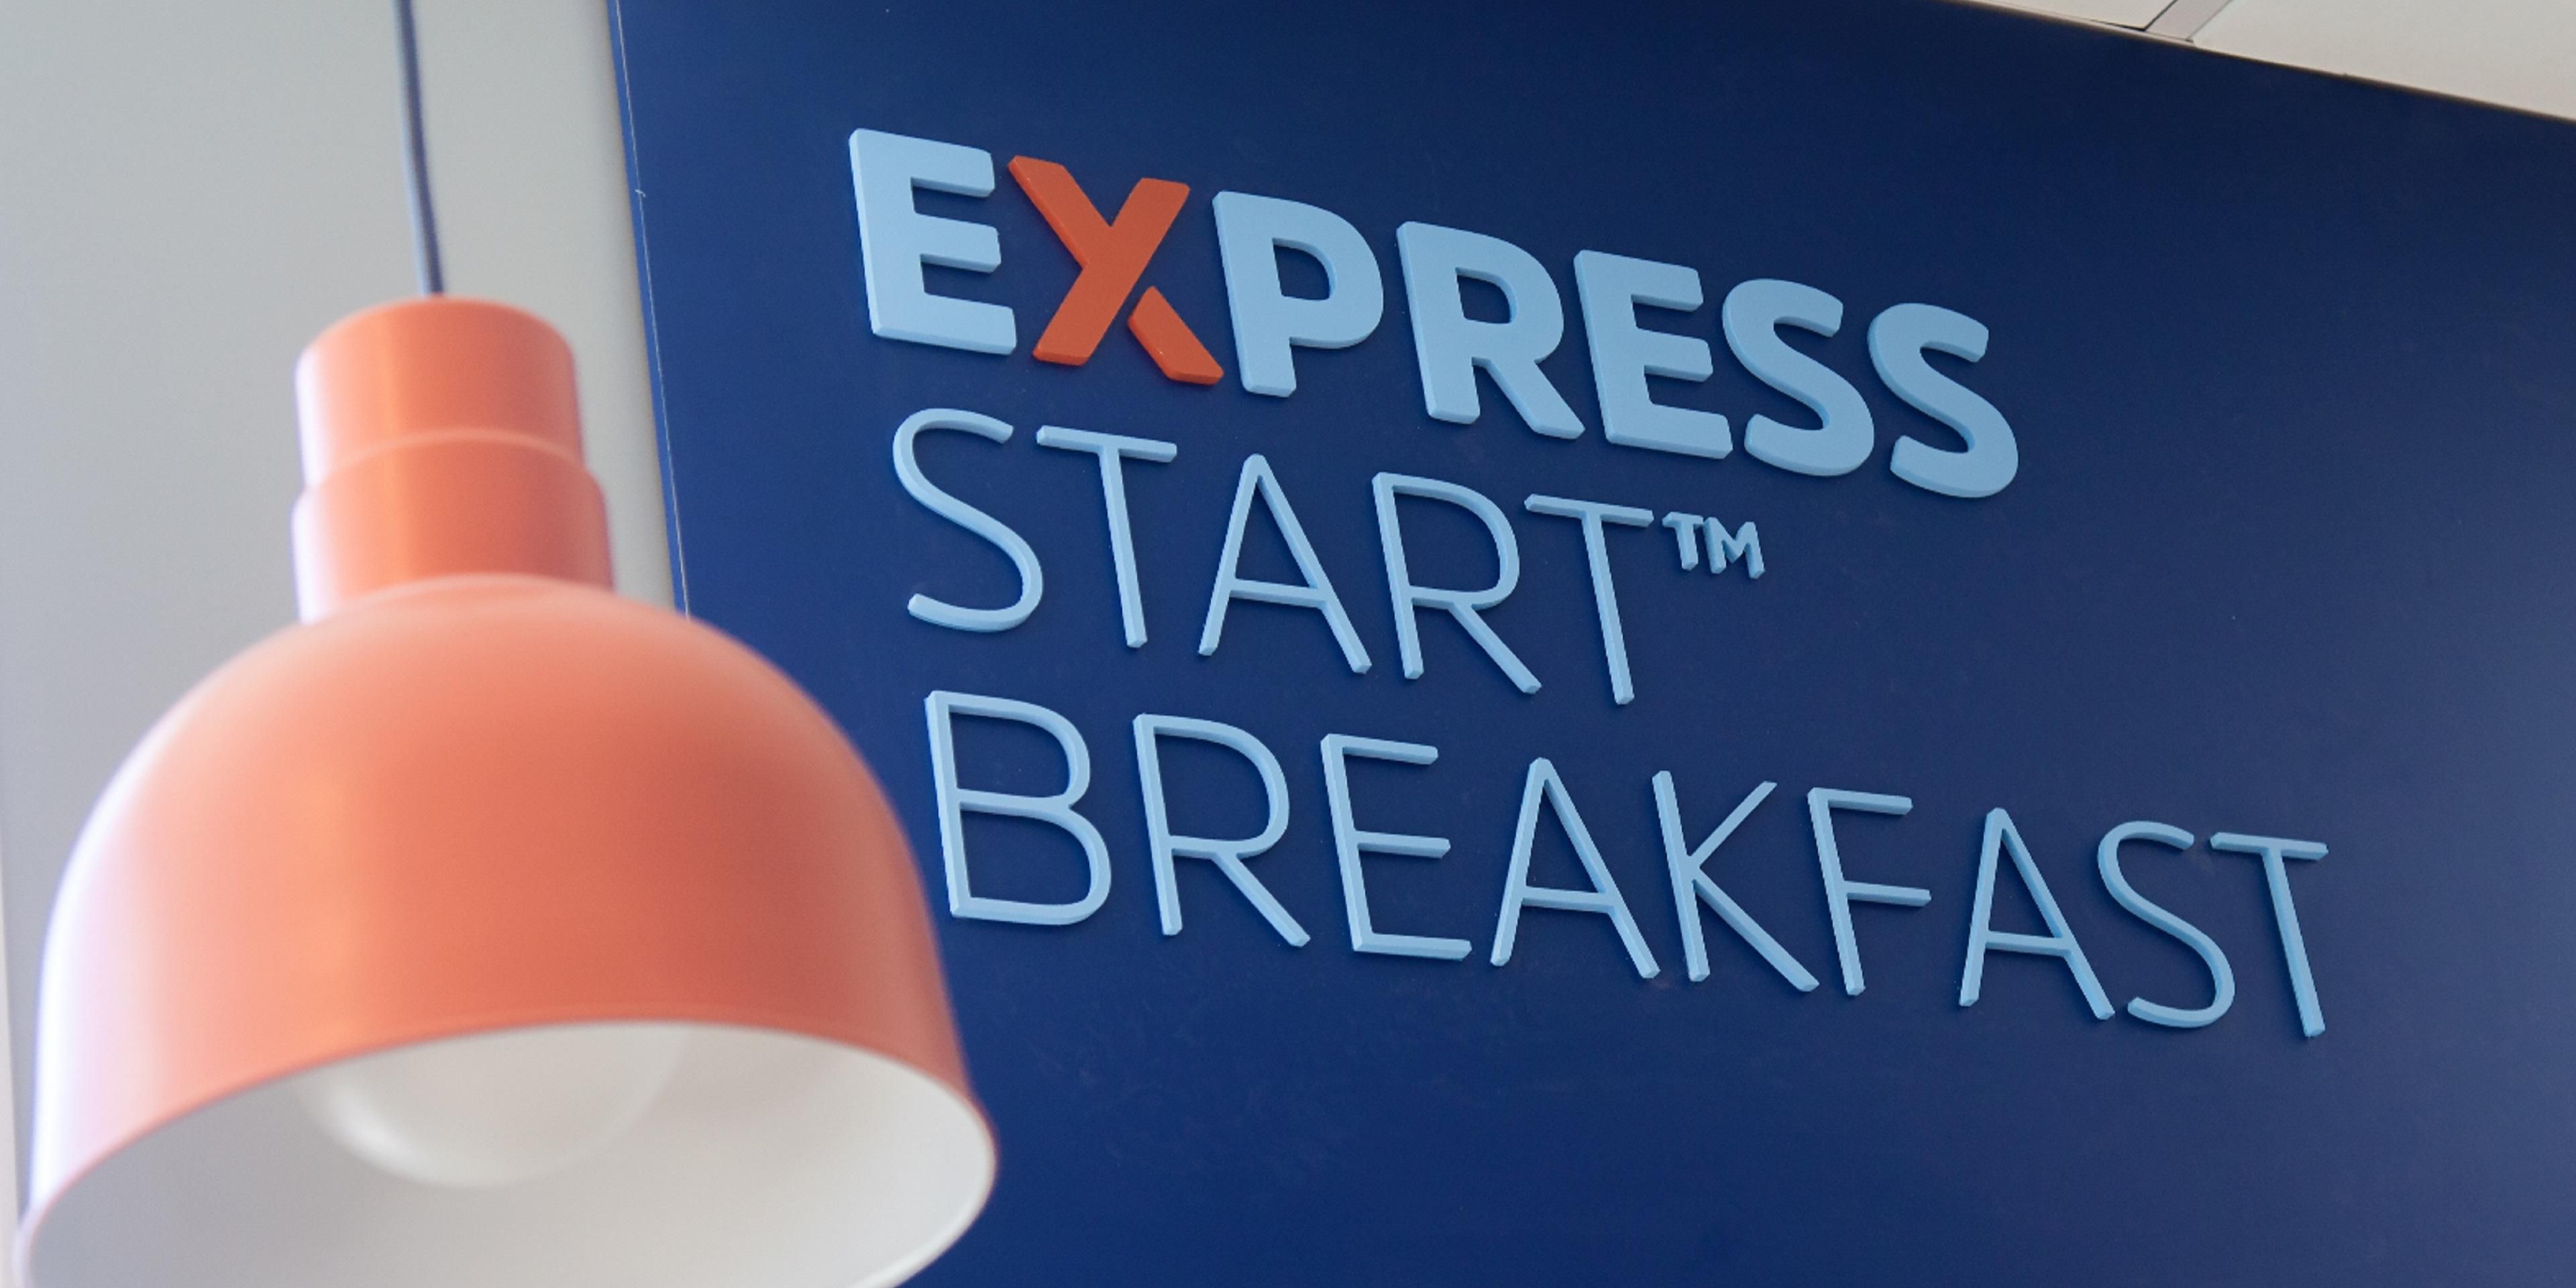 Kick start your day with our Express Start Breakfast, with grab ‘n’ go options and favorites such as eggs and bacon, our signature cinnamon rolls and fresh coffee. Offered from 6:30AM-9:30AM on Weekdays and 7:00AM-10:00AM on Weekends.